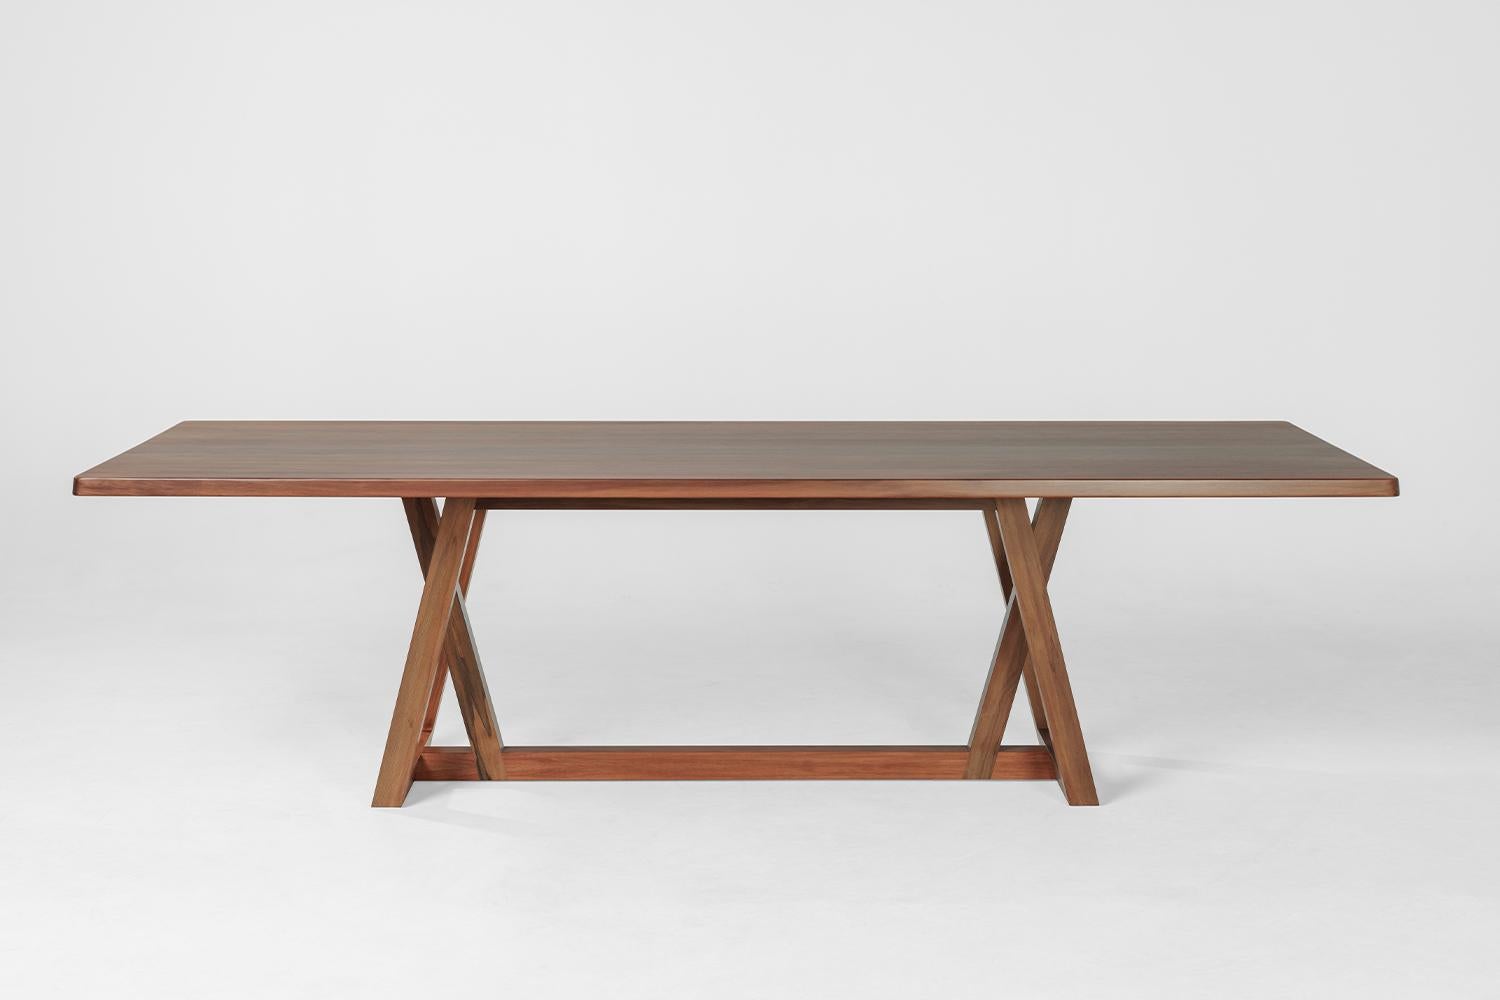 The subtle expression of natural beauty and craftsmanship, the Umber table was created by taking a trapezoid form and establishing juxtapositions with the base and top elements.

The Umber table is made from matai, a New Zealand native tree, rescued